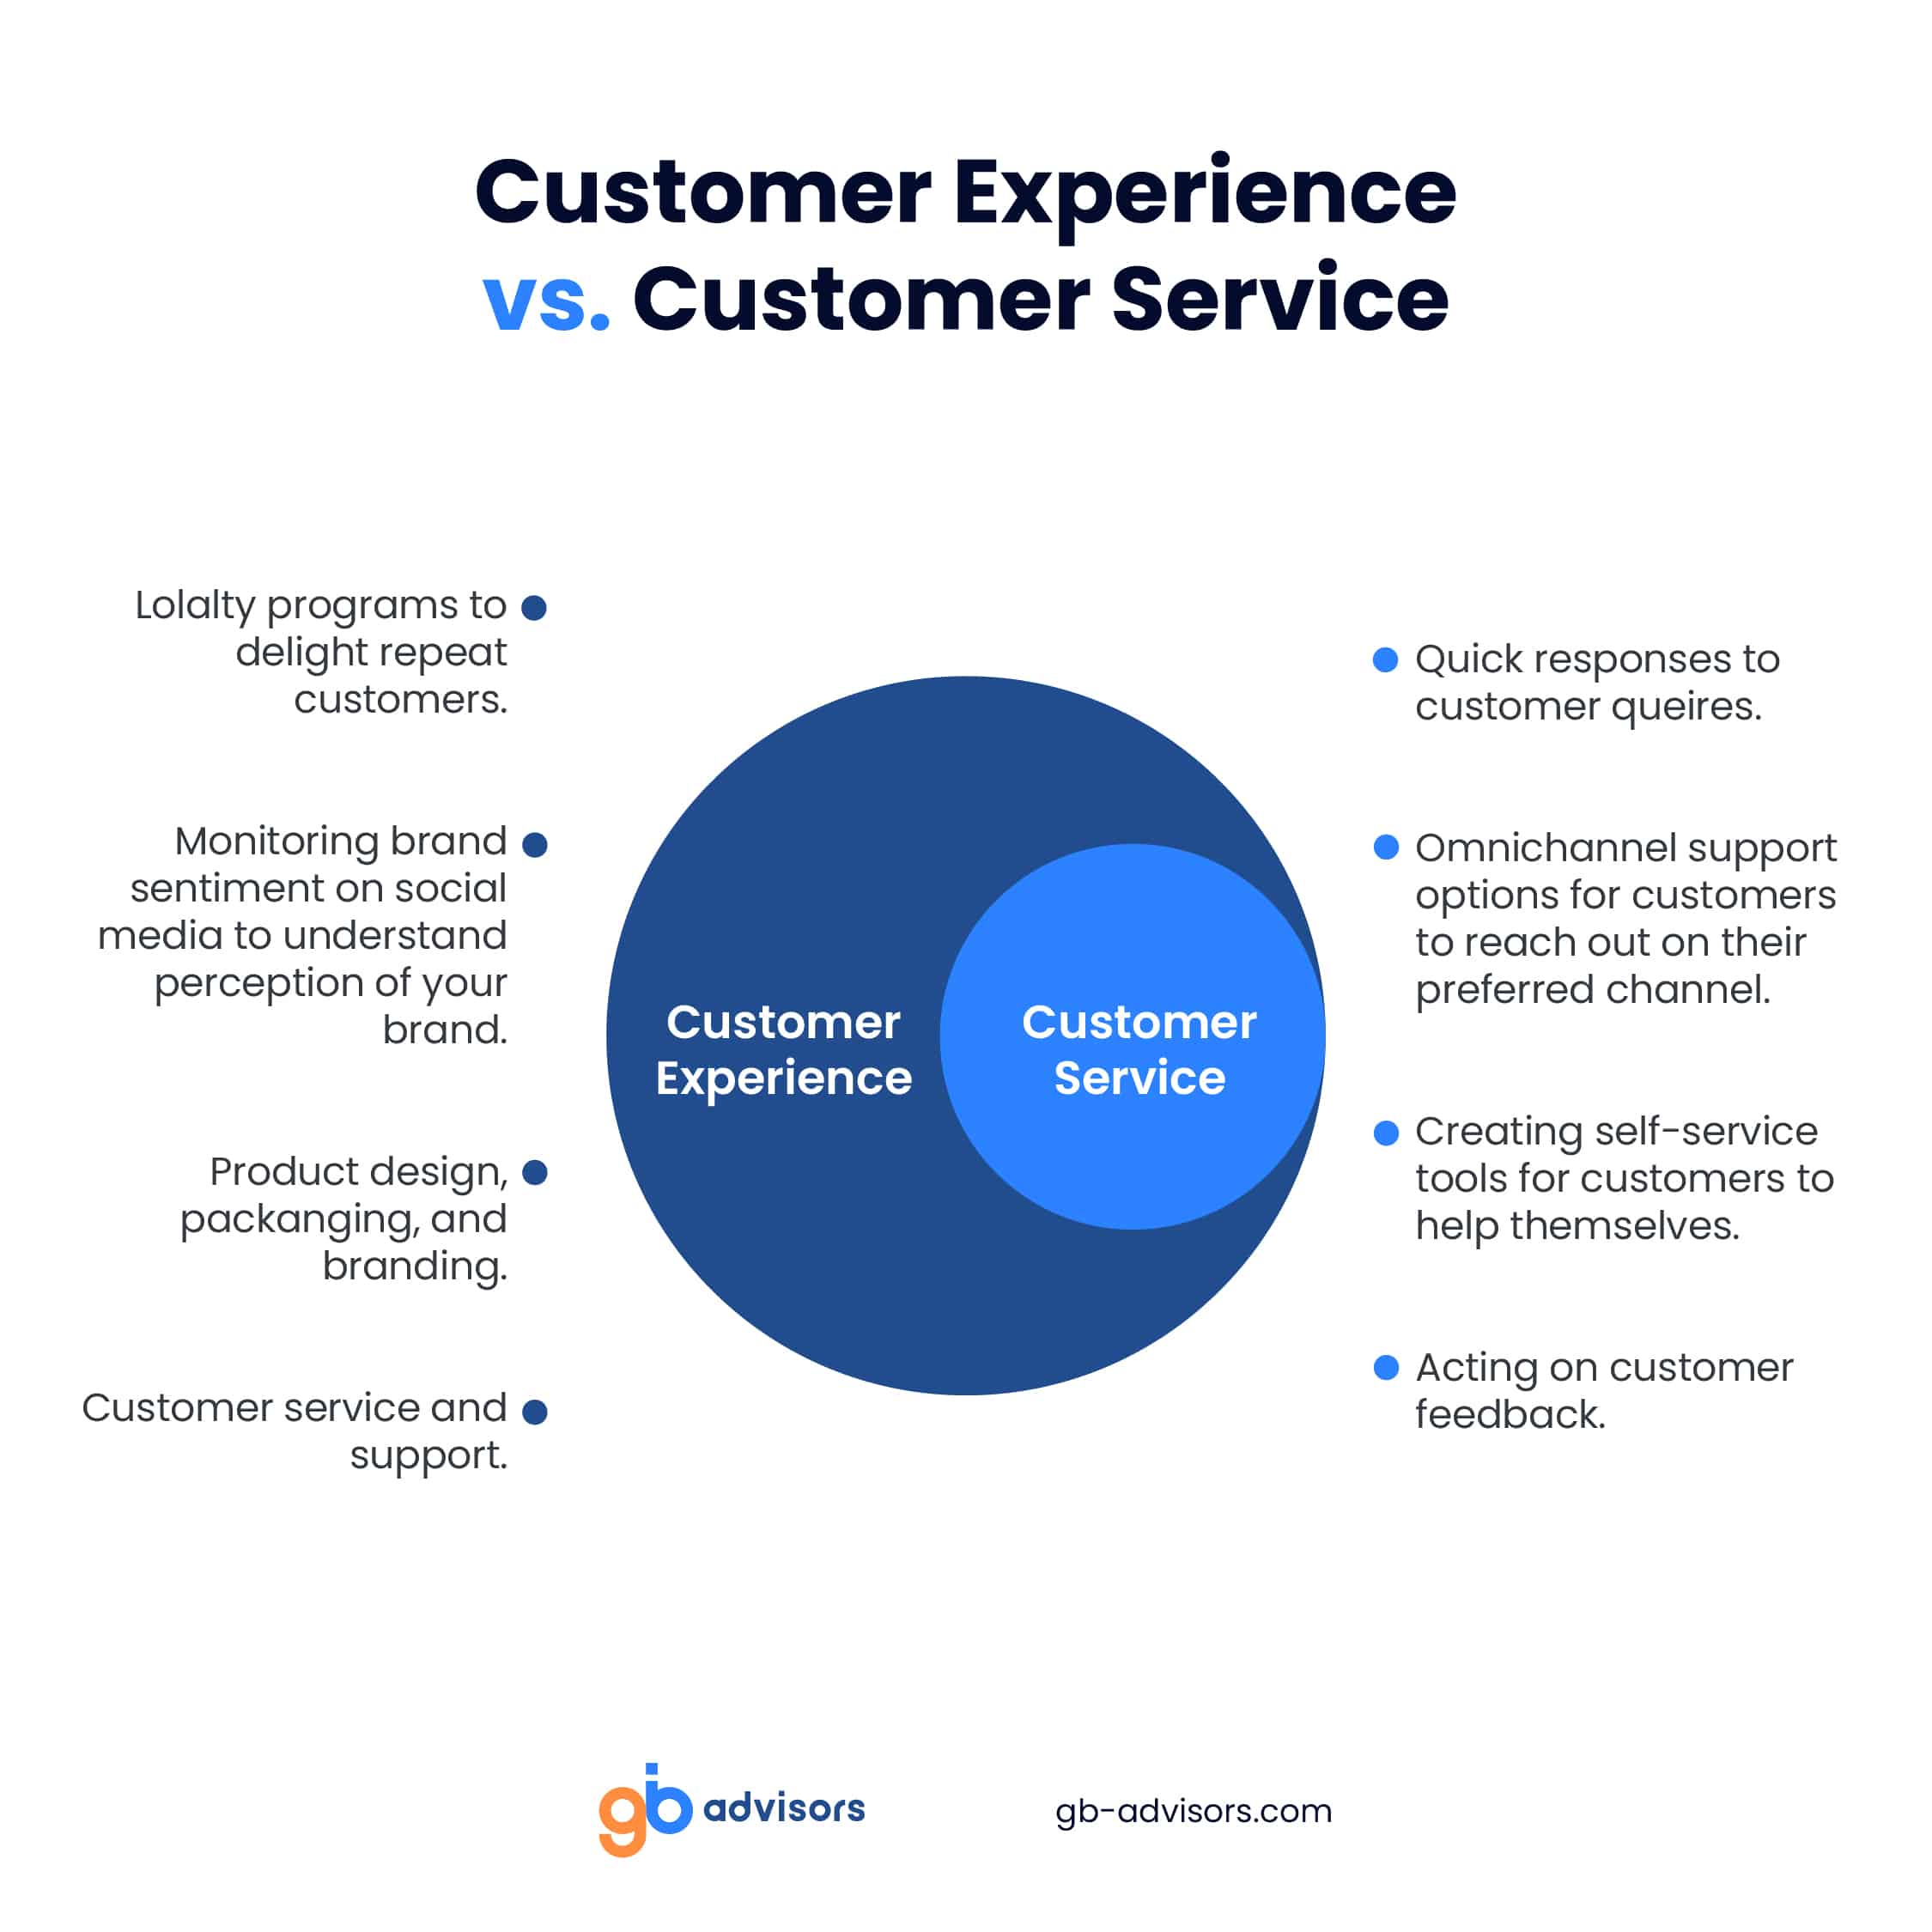 Elements of customer experience and customer service